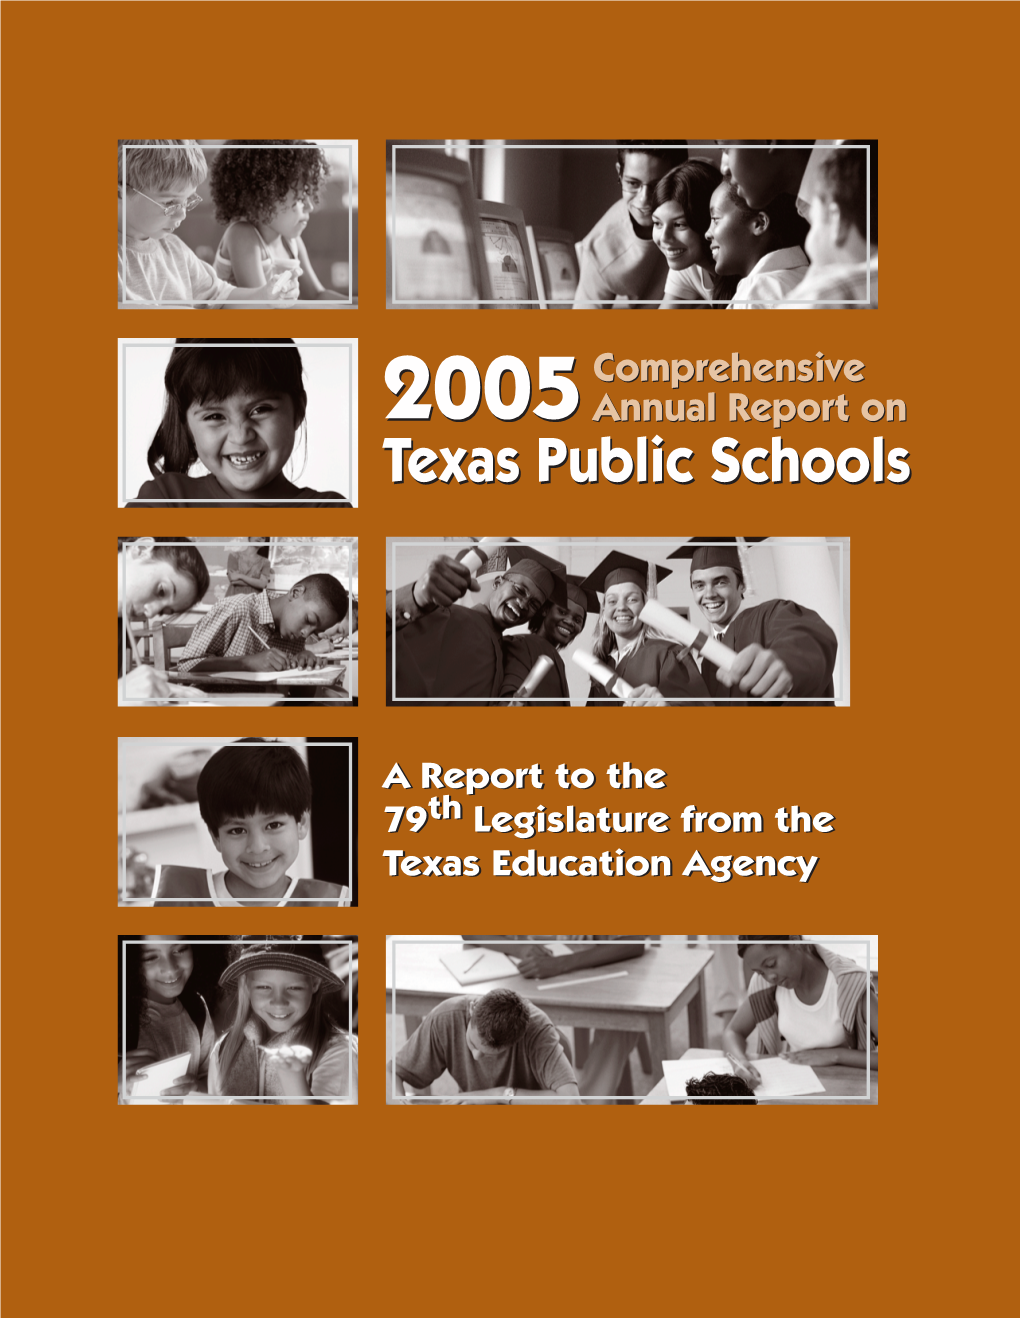 2005 Comprehensive Annual Report on Texas Public Schools Describes the Status of Texas Public Education, As Required by §39.182 of the Texas Education Code